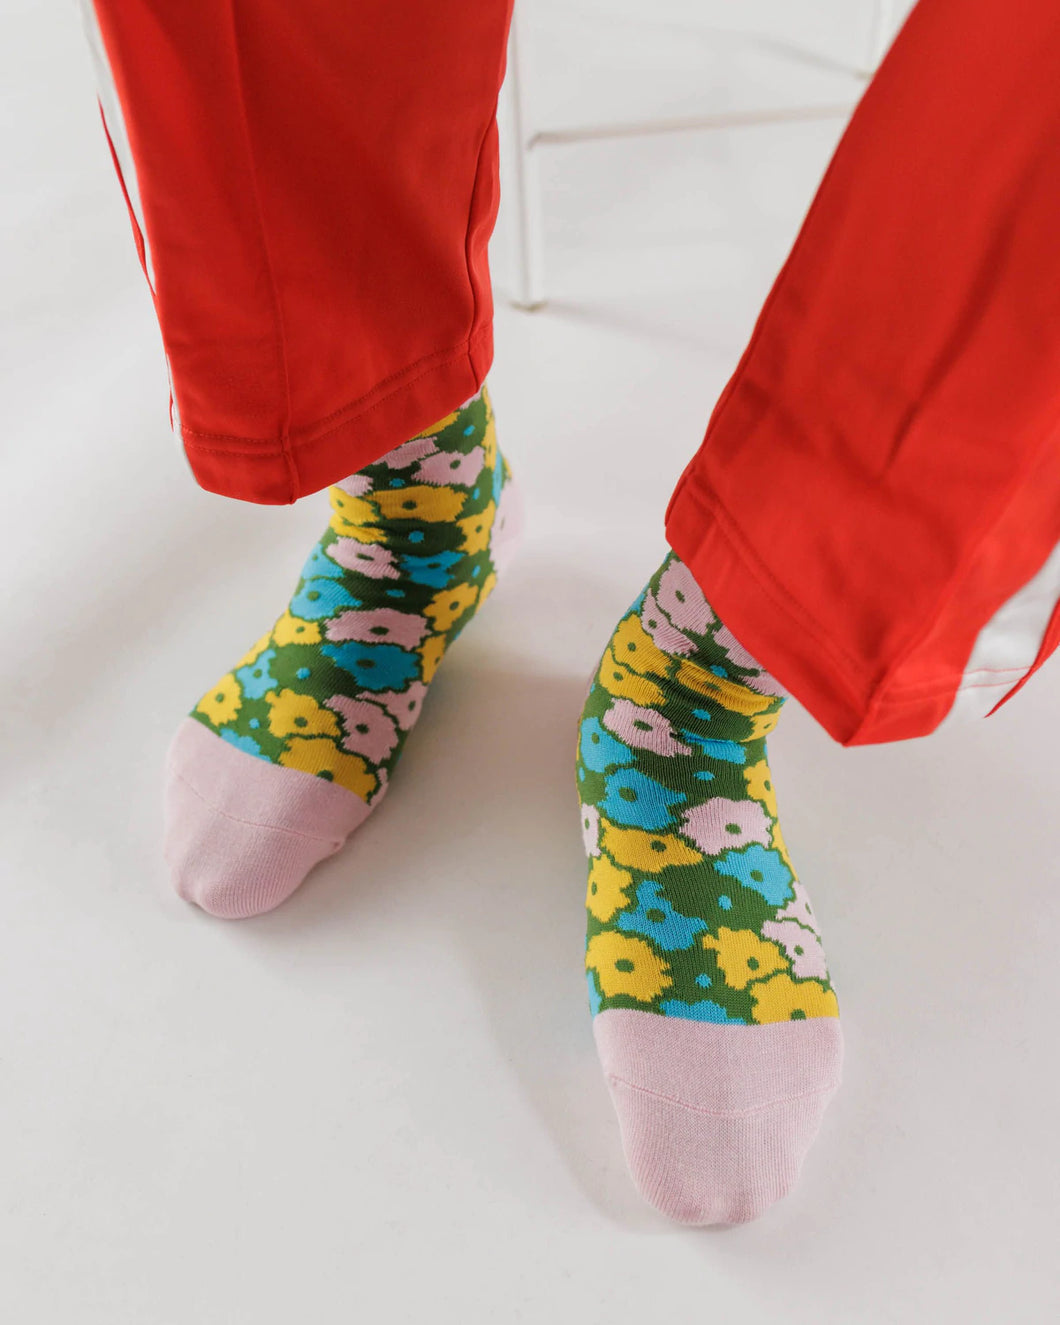  a colour photo of baggu sock on someones feet with blue yellow and green retro flowers